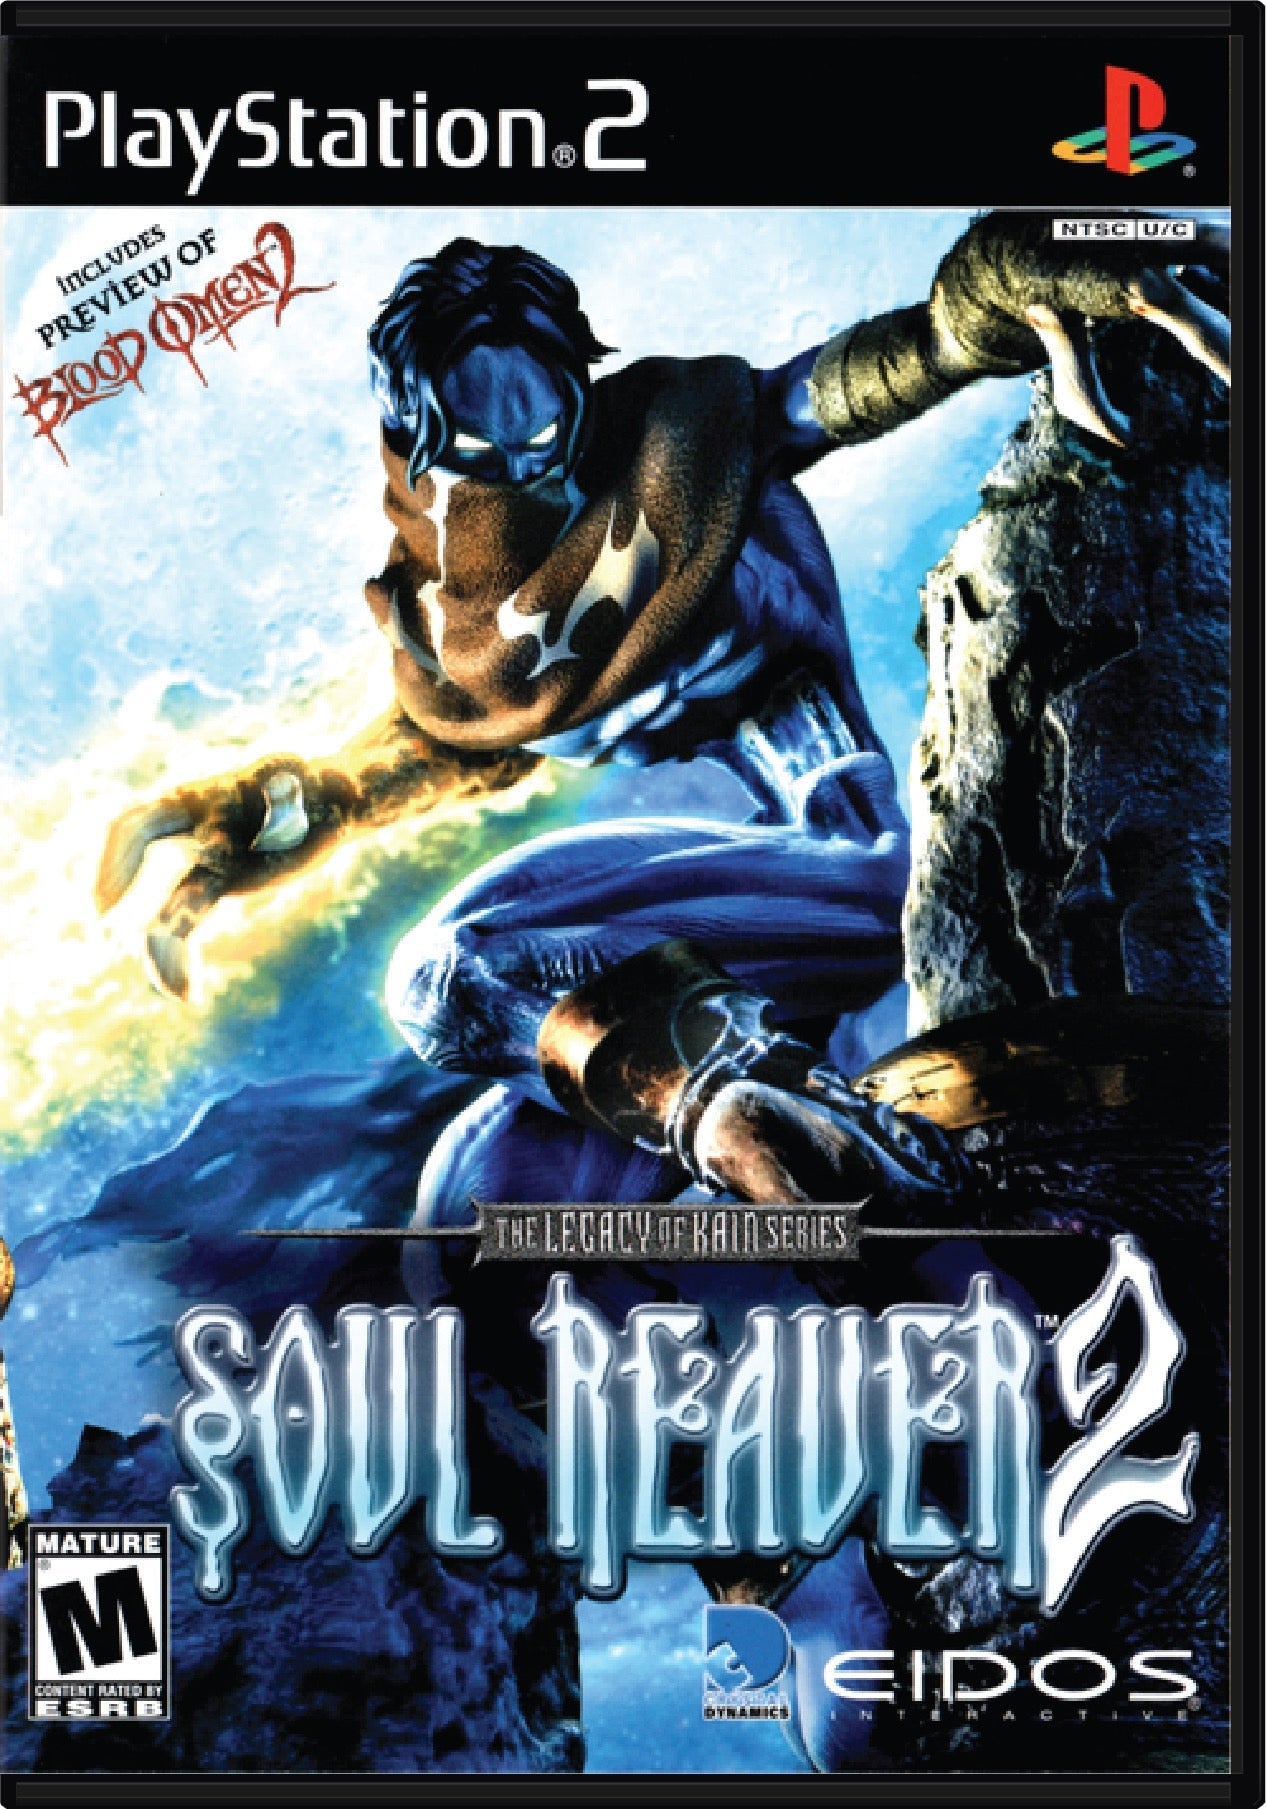 Legacy of Kain Soul Reaver 2 Cover Art and Product Photo